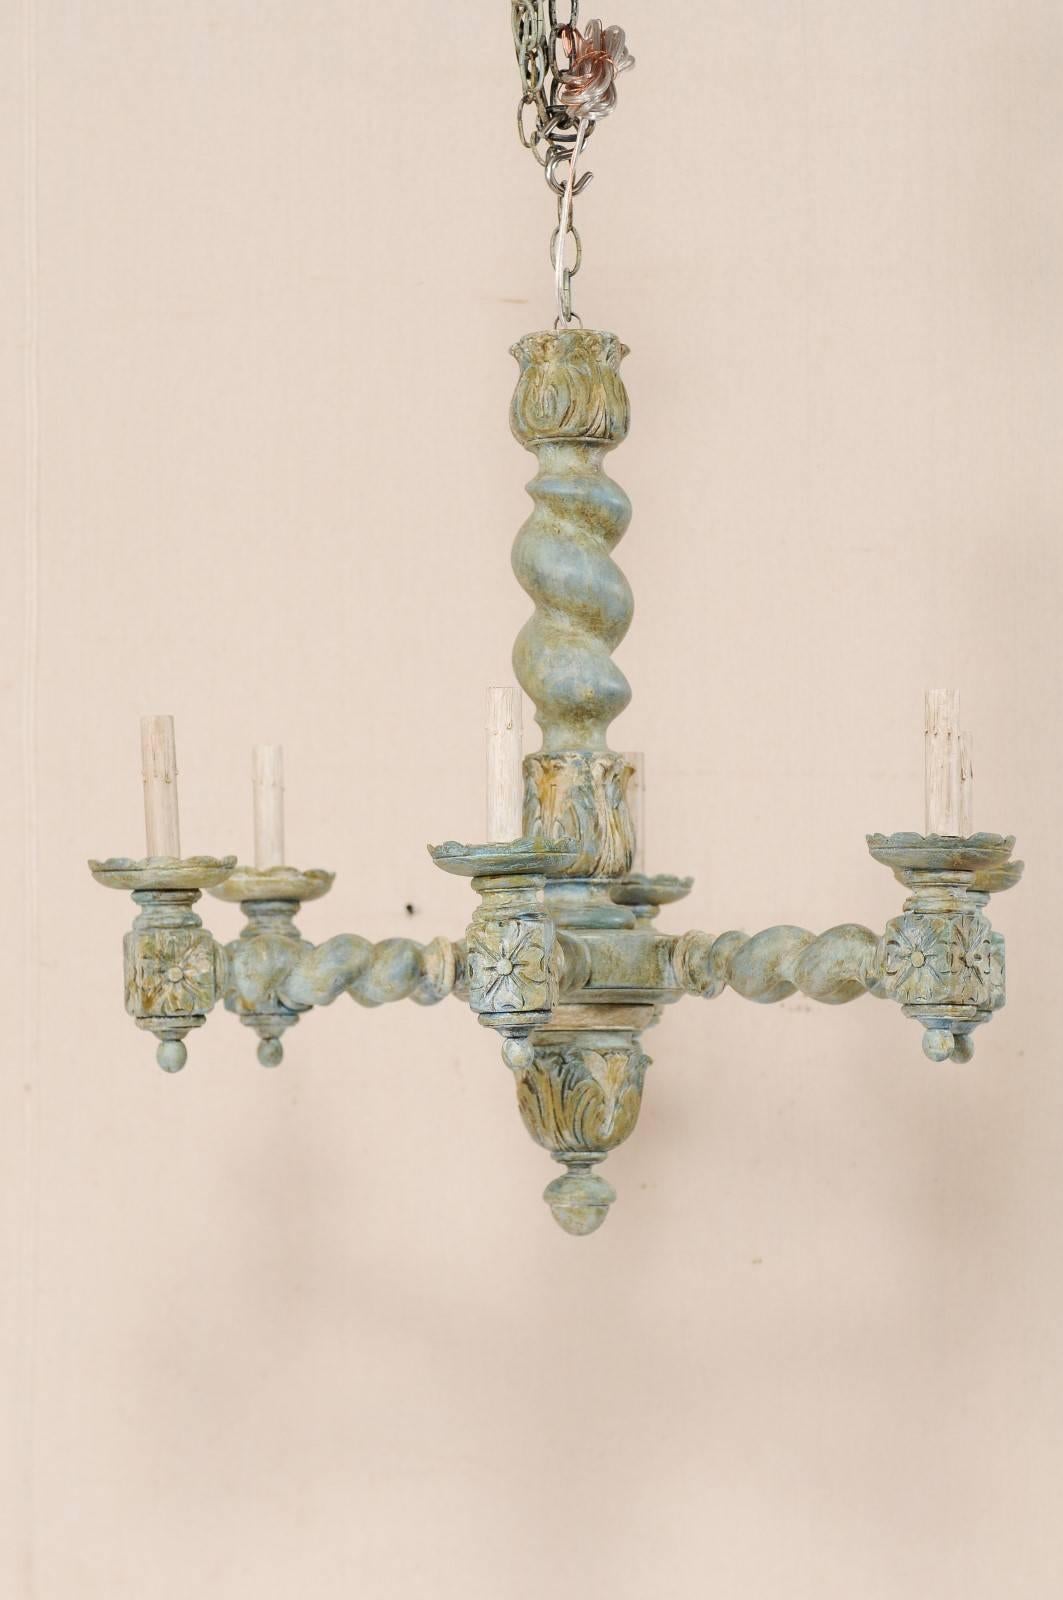 A French six-light, barley twist painted wood chandelier. This French vintage painted wood chandelier features a central barley twist column with acanthus leaf motifs from the upper and lower ends. Six barley twist arms extend out from the central